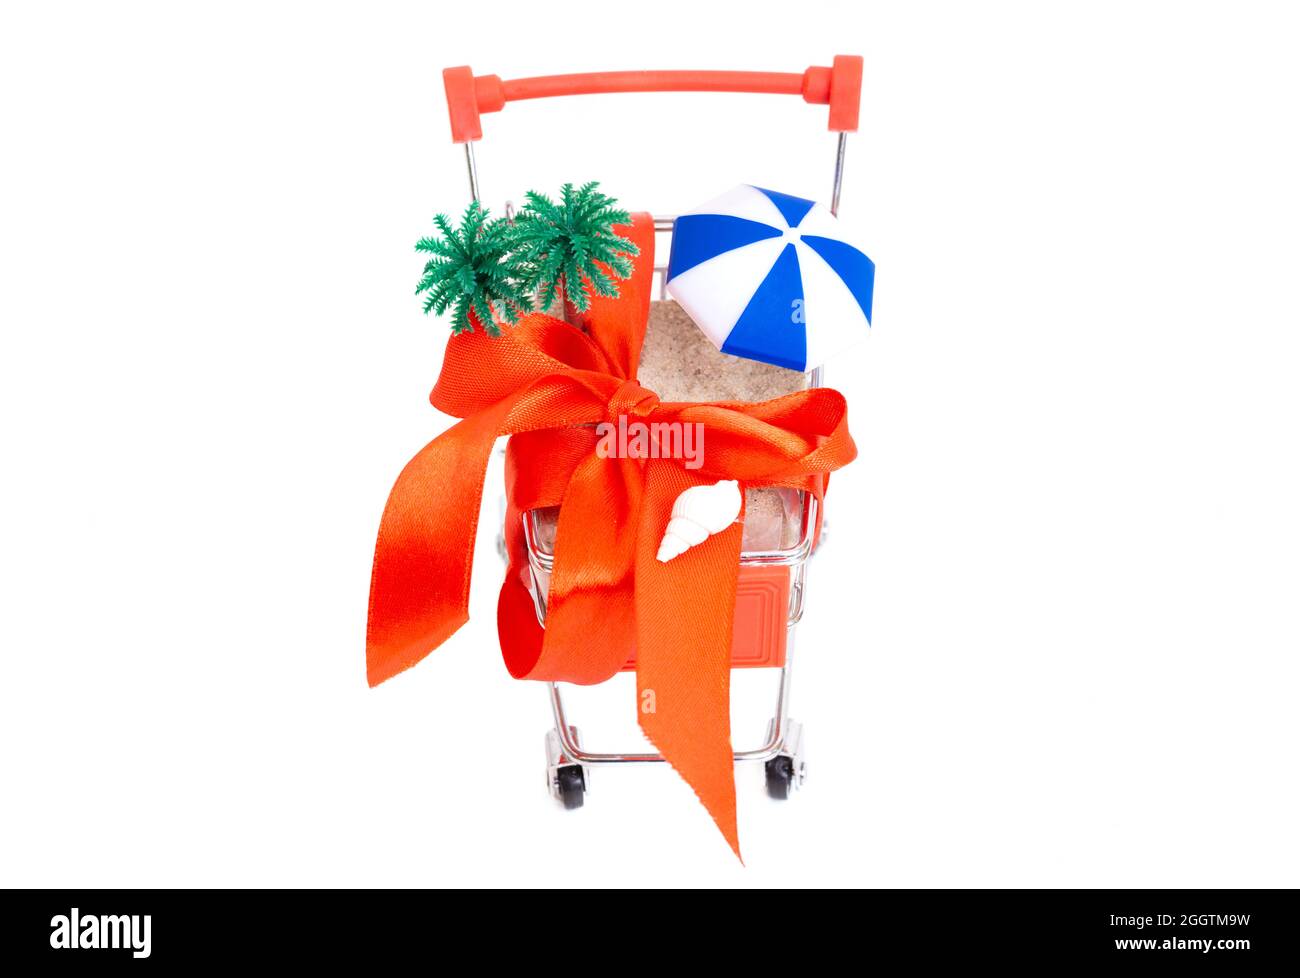 Tropical beach set-up in a miniature shopping cart with a big red bow isolated on white. Gifting a beach vacation. Stock Photo